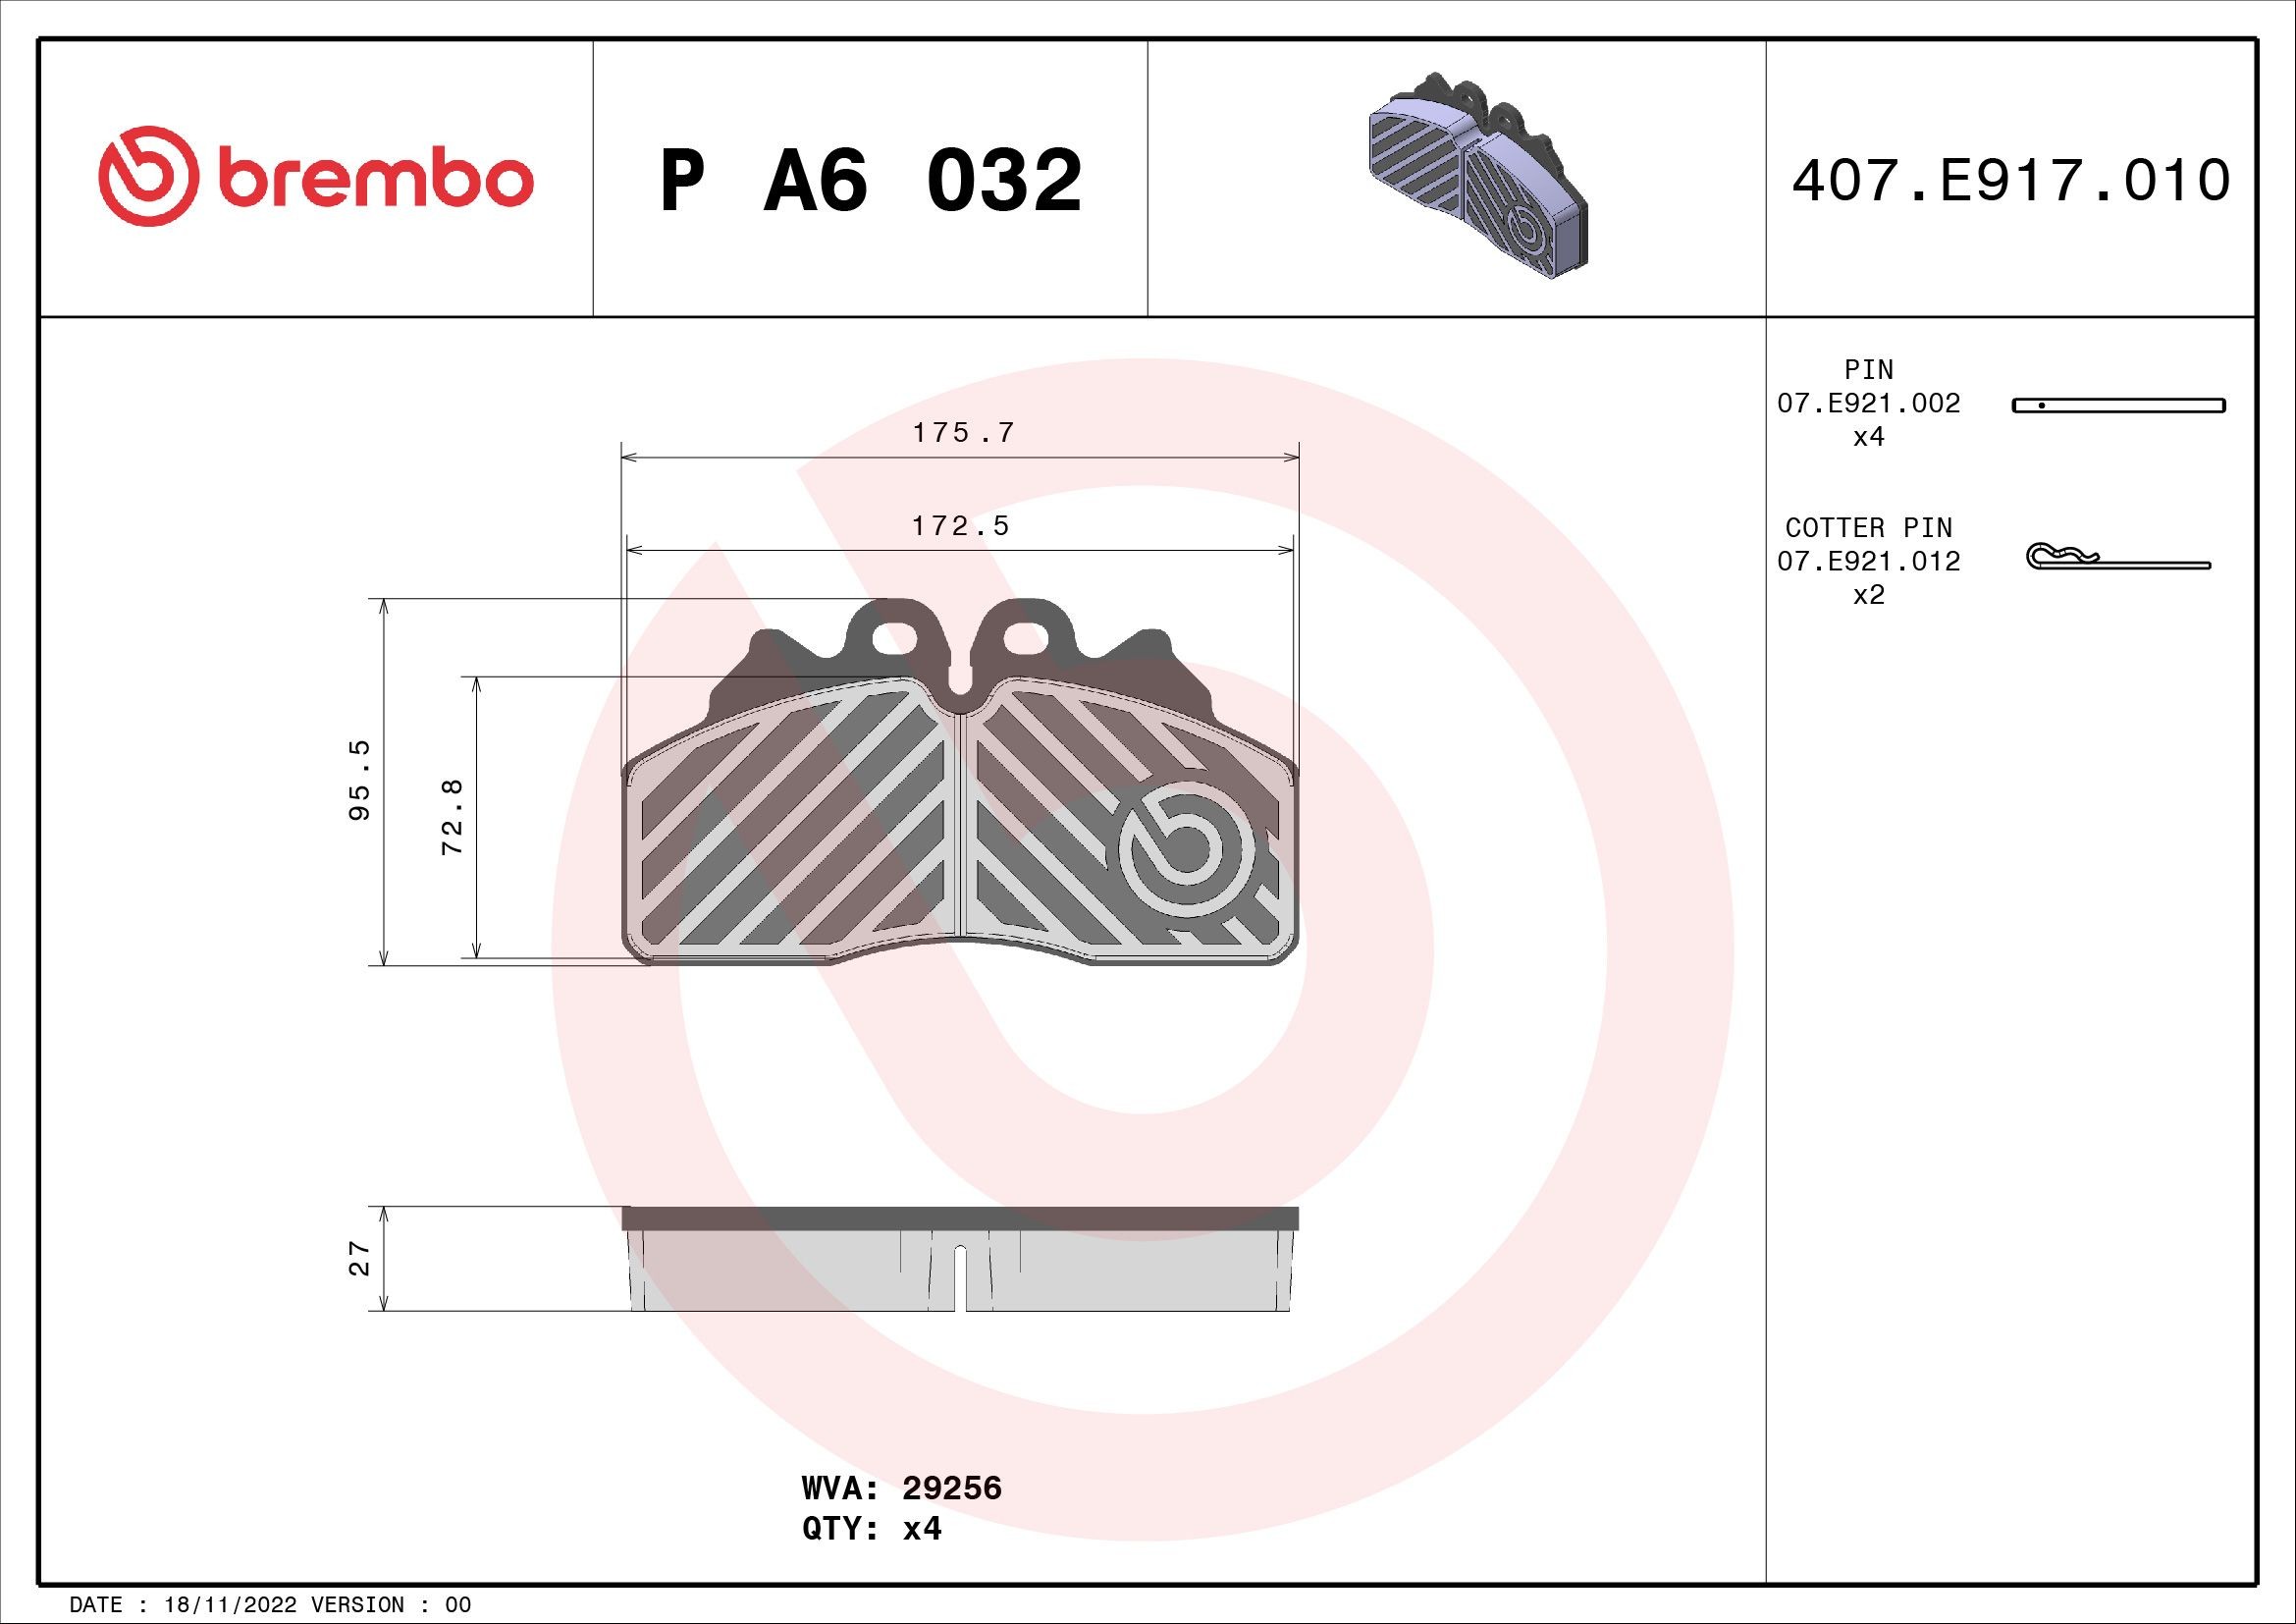 BREMBO P A6 032 Brake pad set prepared for wear indicator, with accessories